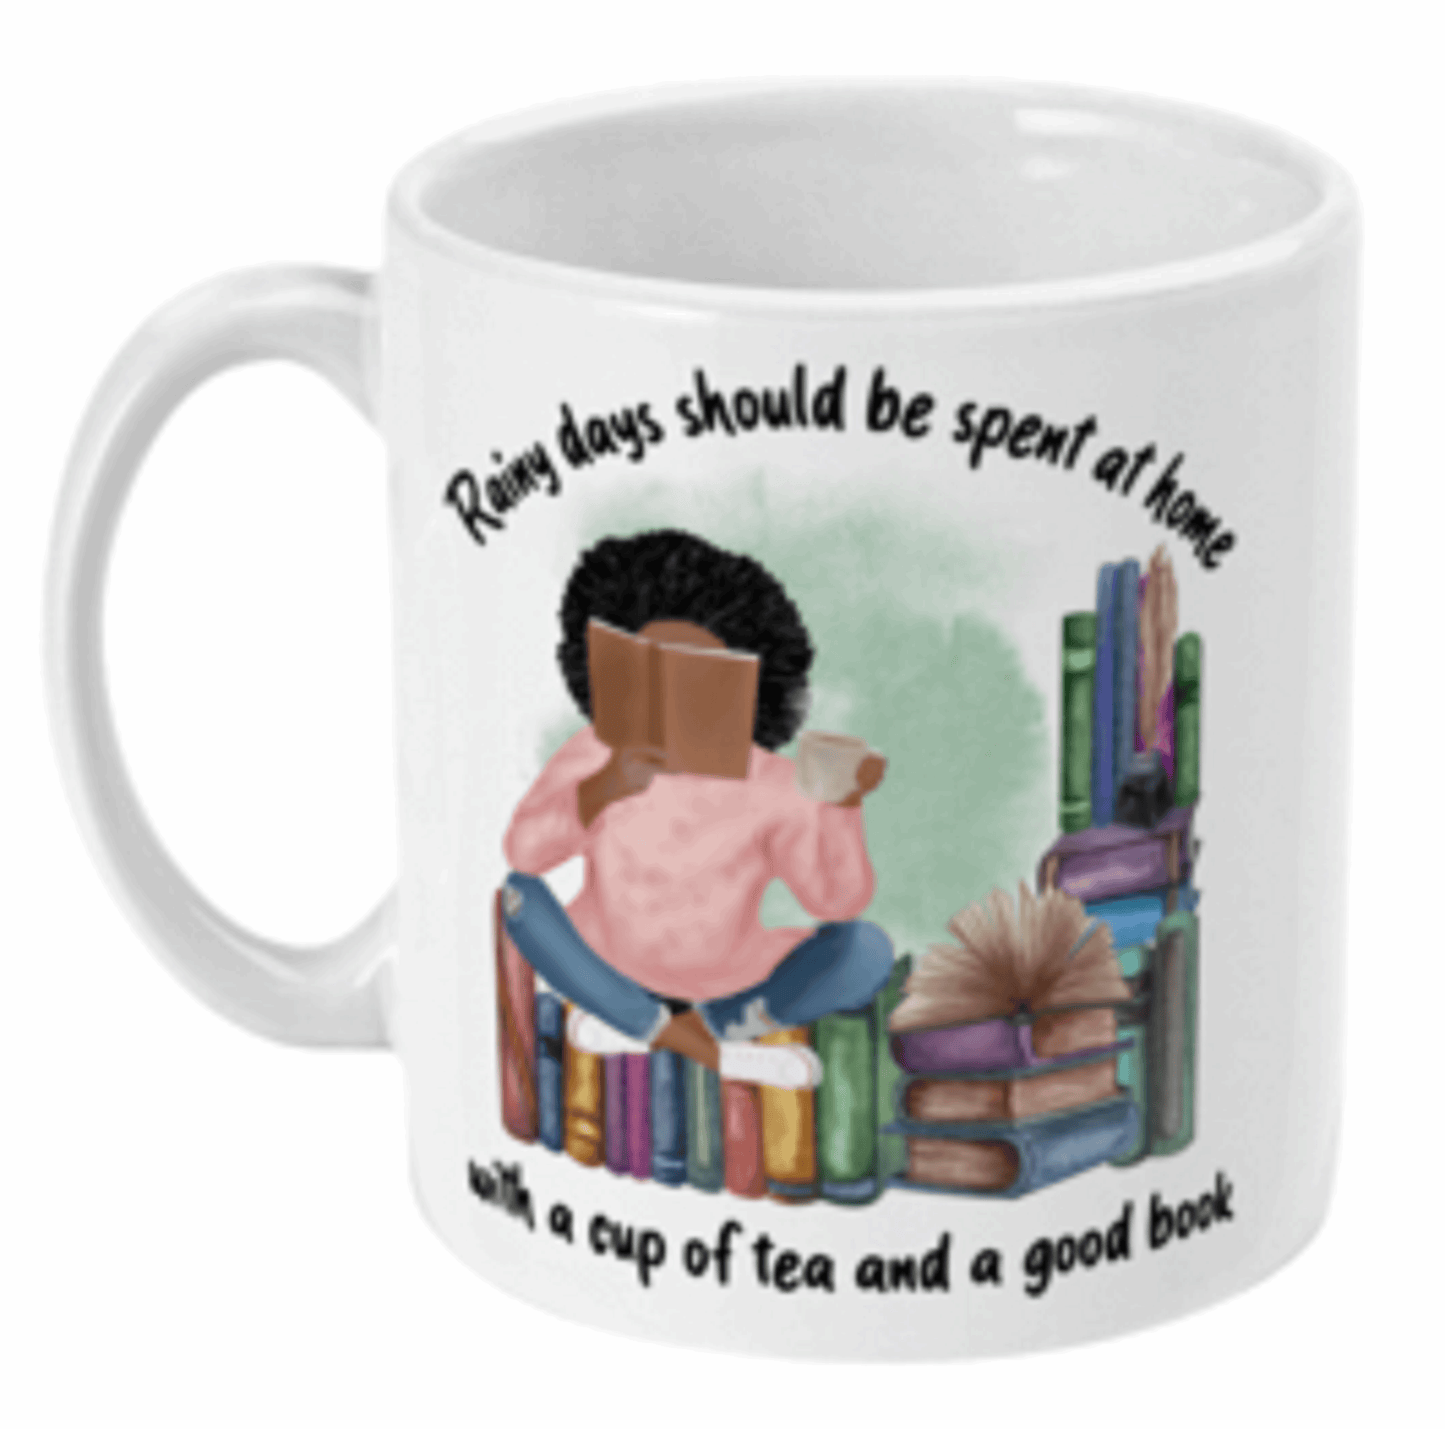  Rainy Days Should Be Spent At Home Coffee Mug by Free Spirit Accessories sold by Free Spirit Accessories